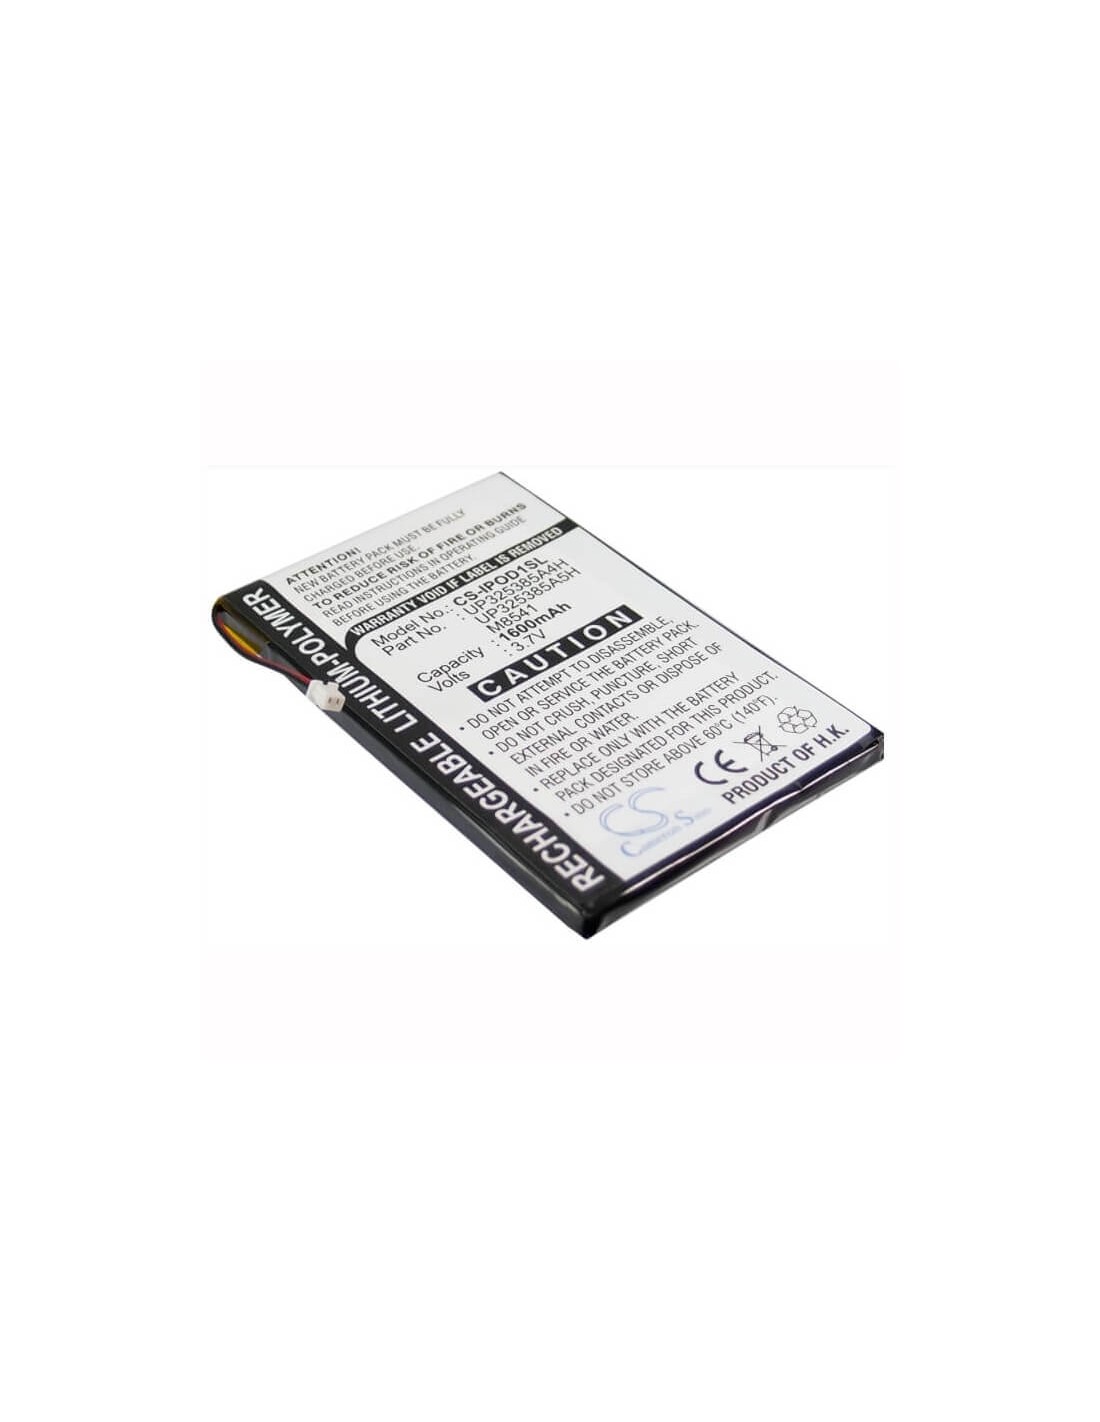 Battery for Apple Ipod 1st, 2nd Generation 3.7V, 1600mAh - 5.92Wh